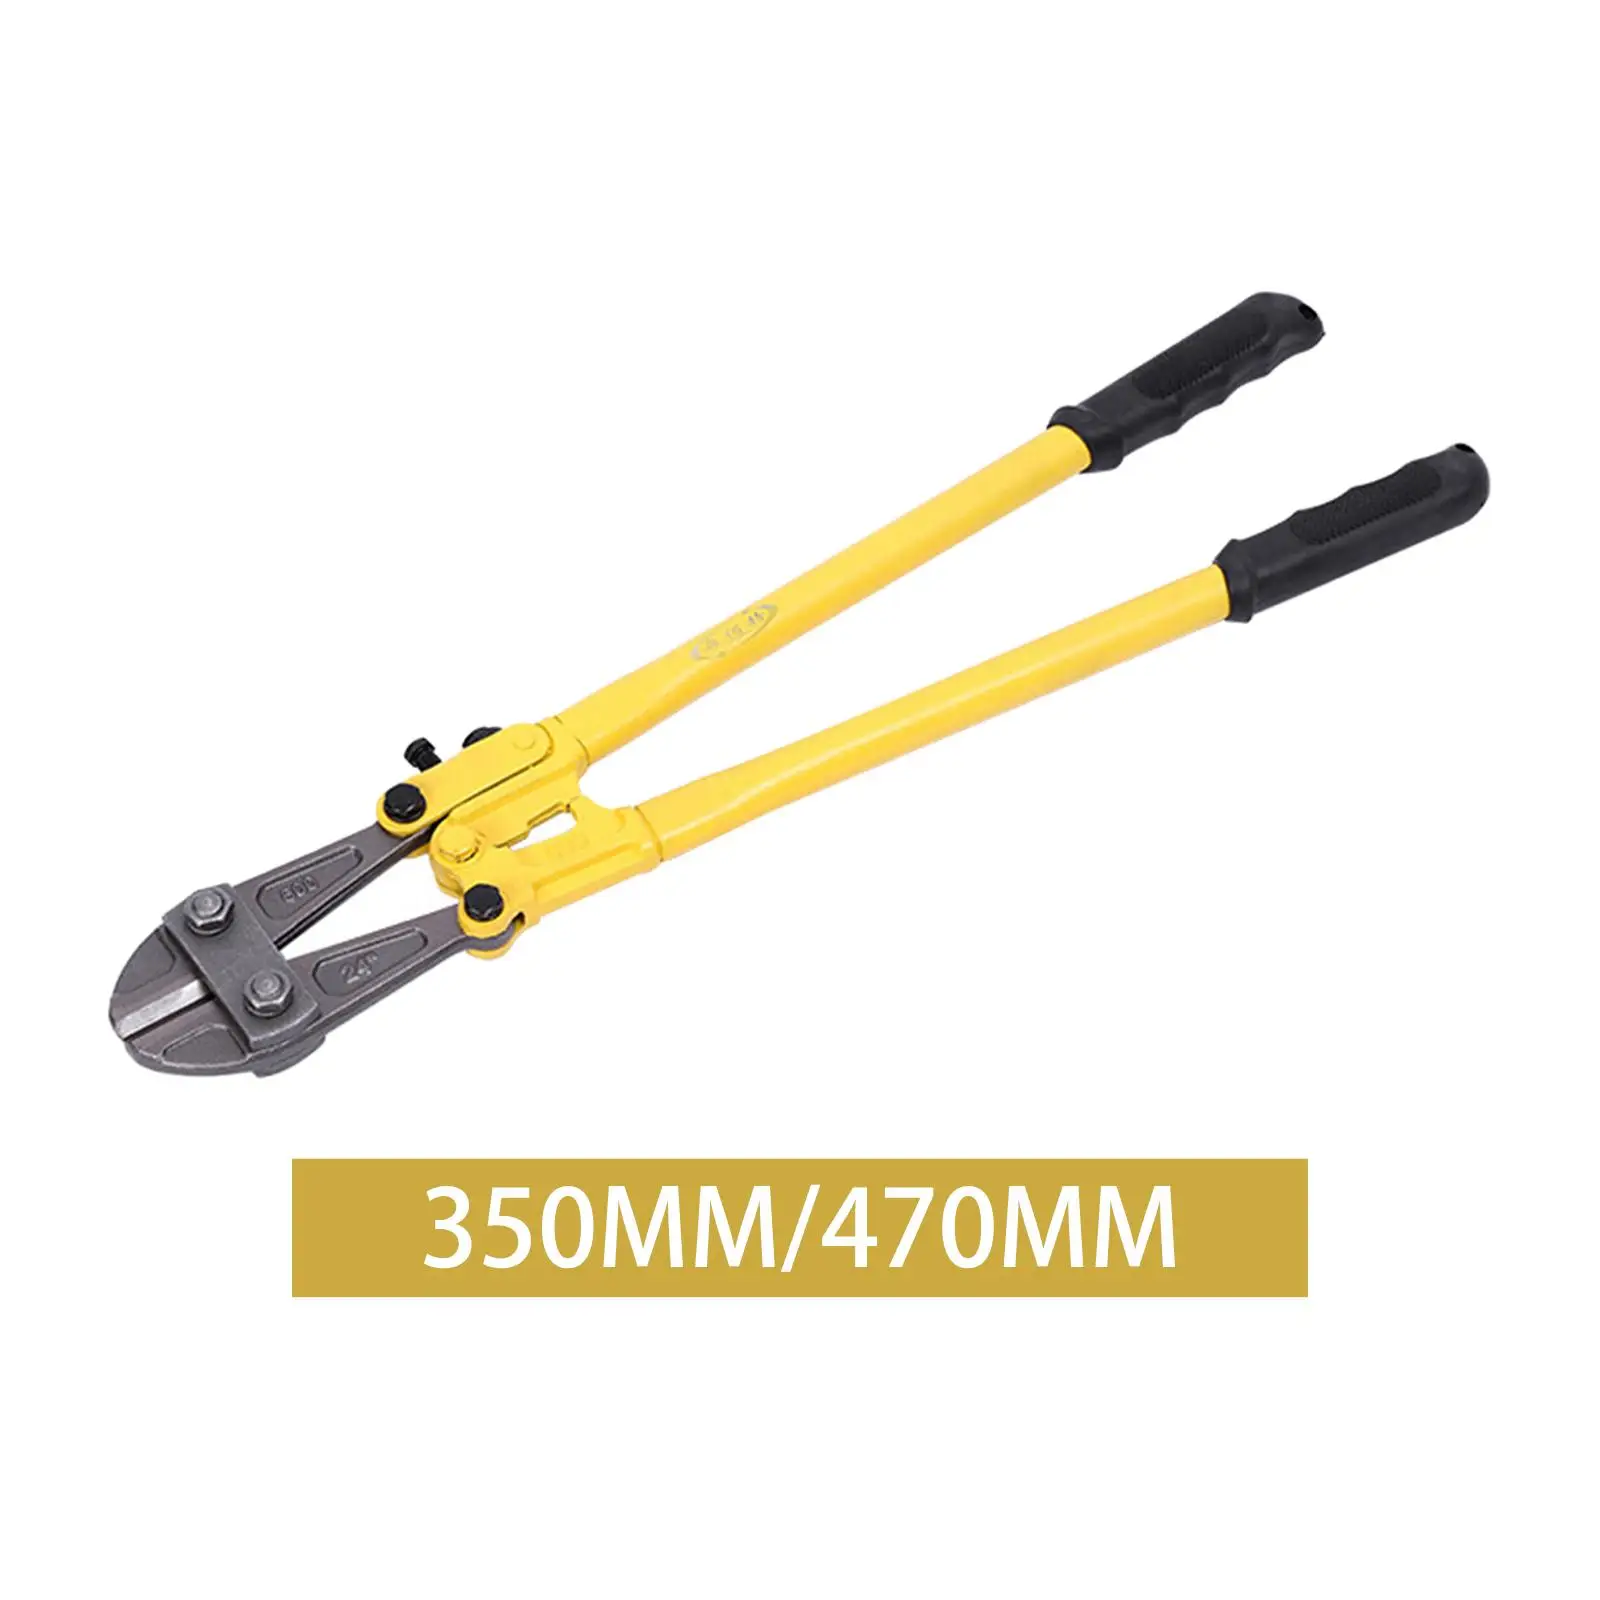 Bolt Cutter with Comfort Grip Heavy Duty Cable Cutter for Screws Rods Bolts